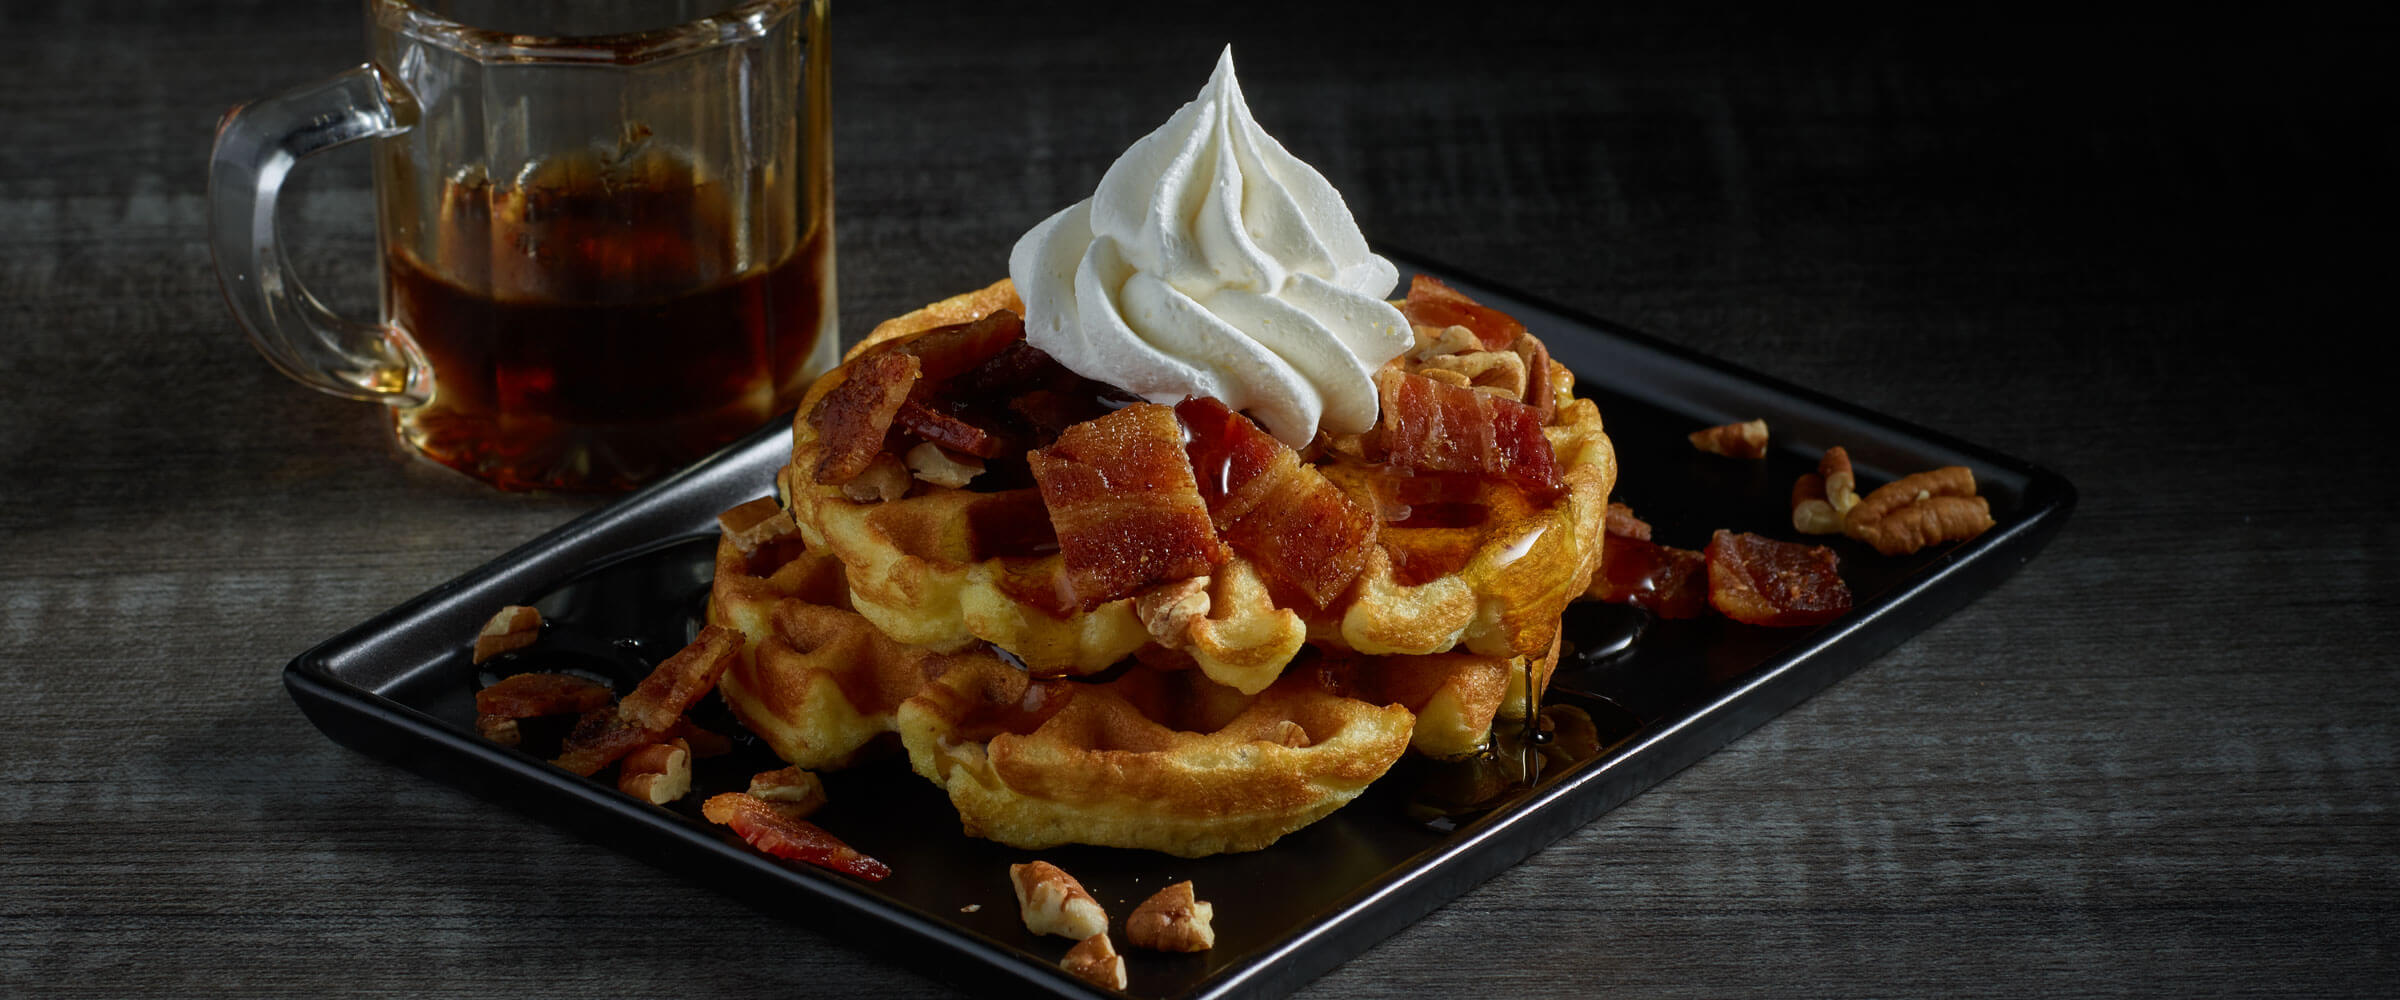 Sweet and Savory Bacon Cream Cheese Chaffles on black plate with extra syrup